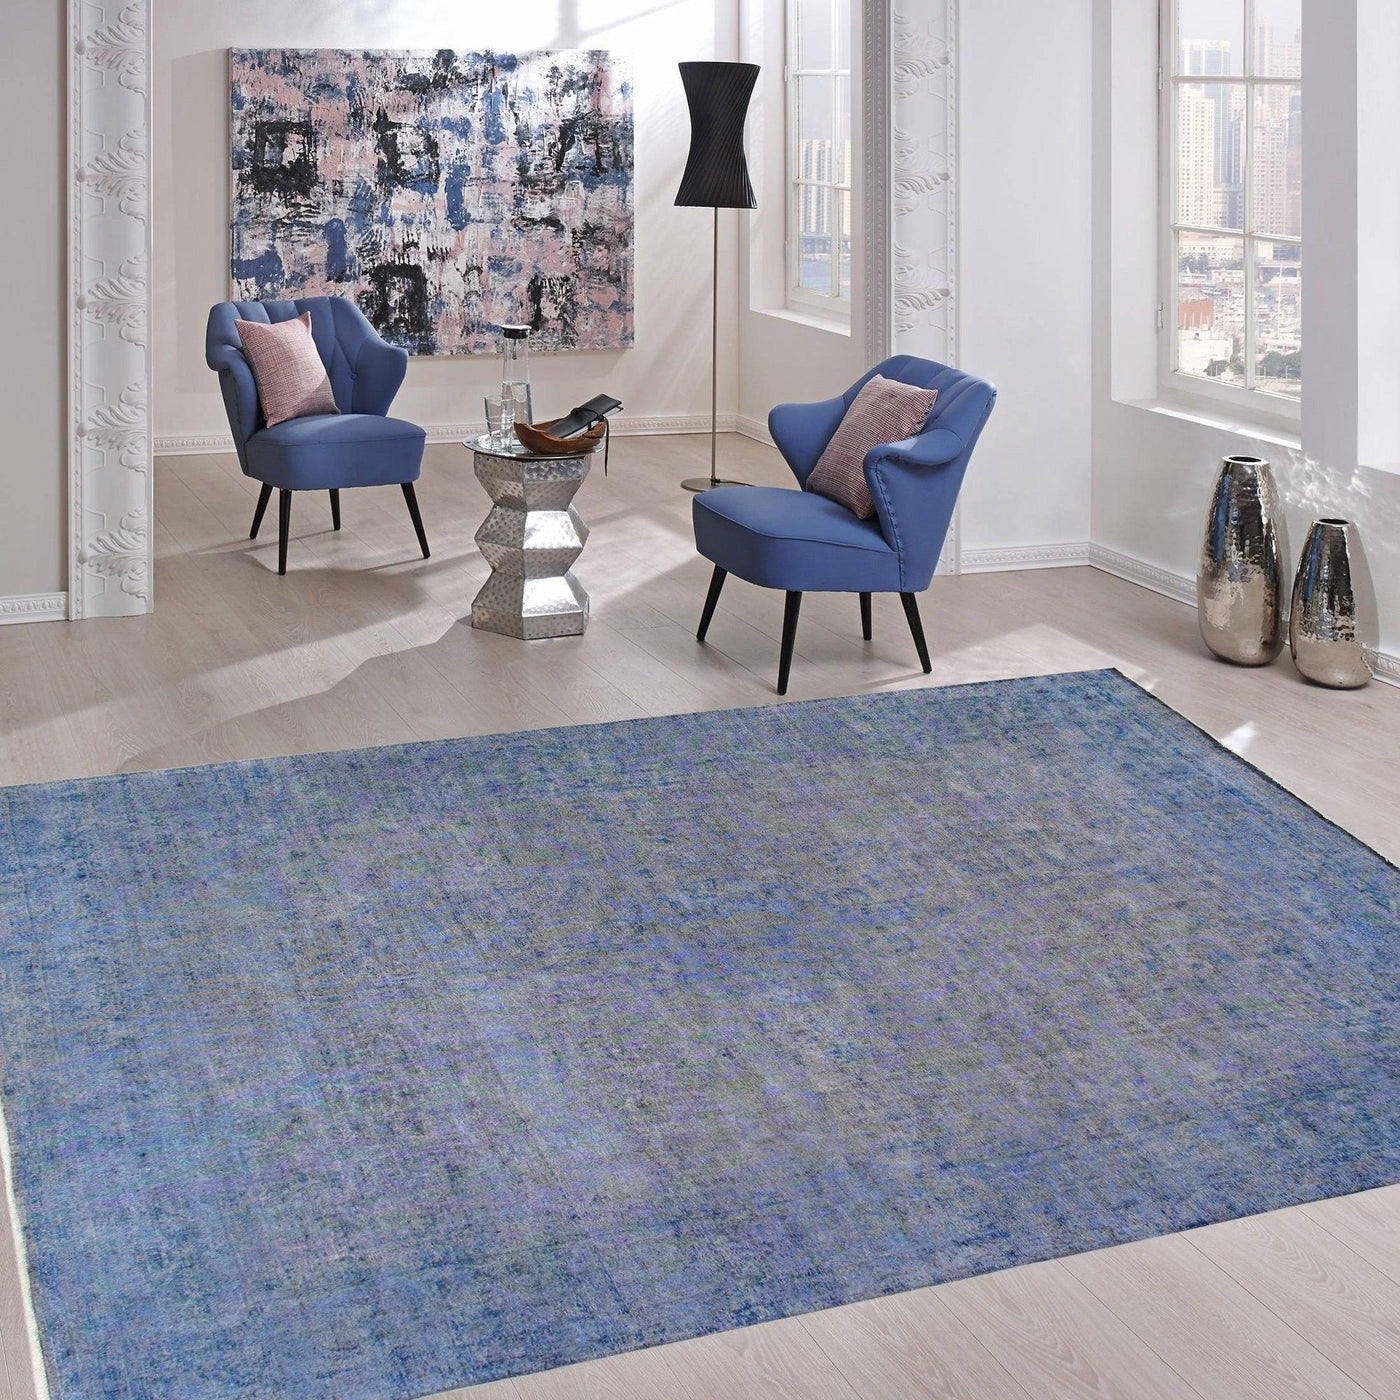 Canvello Vintage Lamb's Wool Overdyed Blue Rug - 10'1" X 12'6"